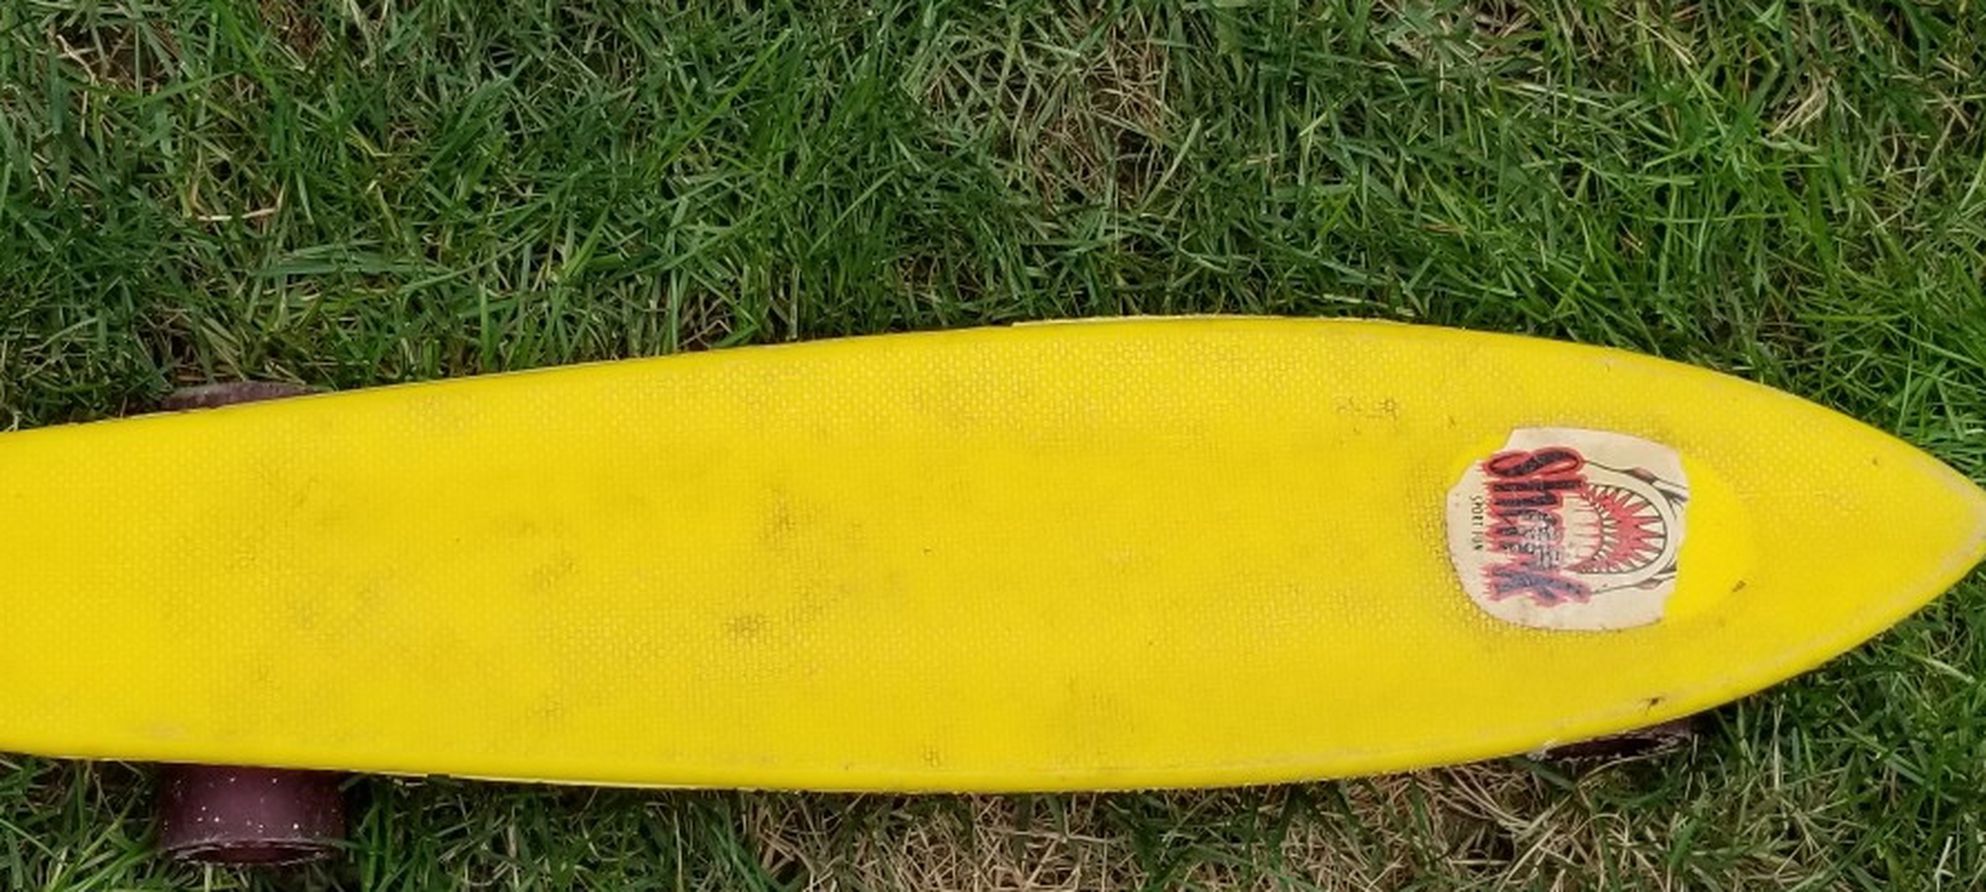 Vintage Shark Skateboard- Yellow with Red Wheels